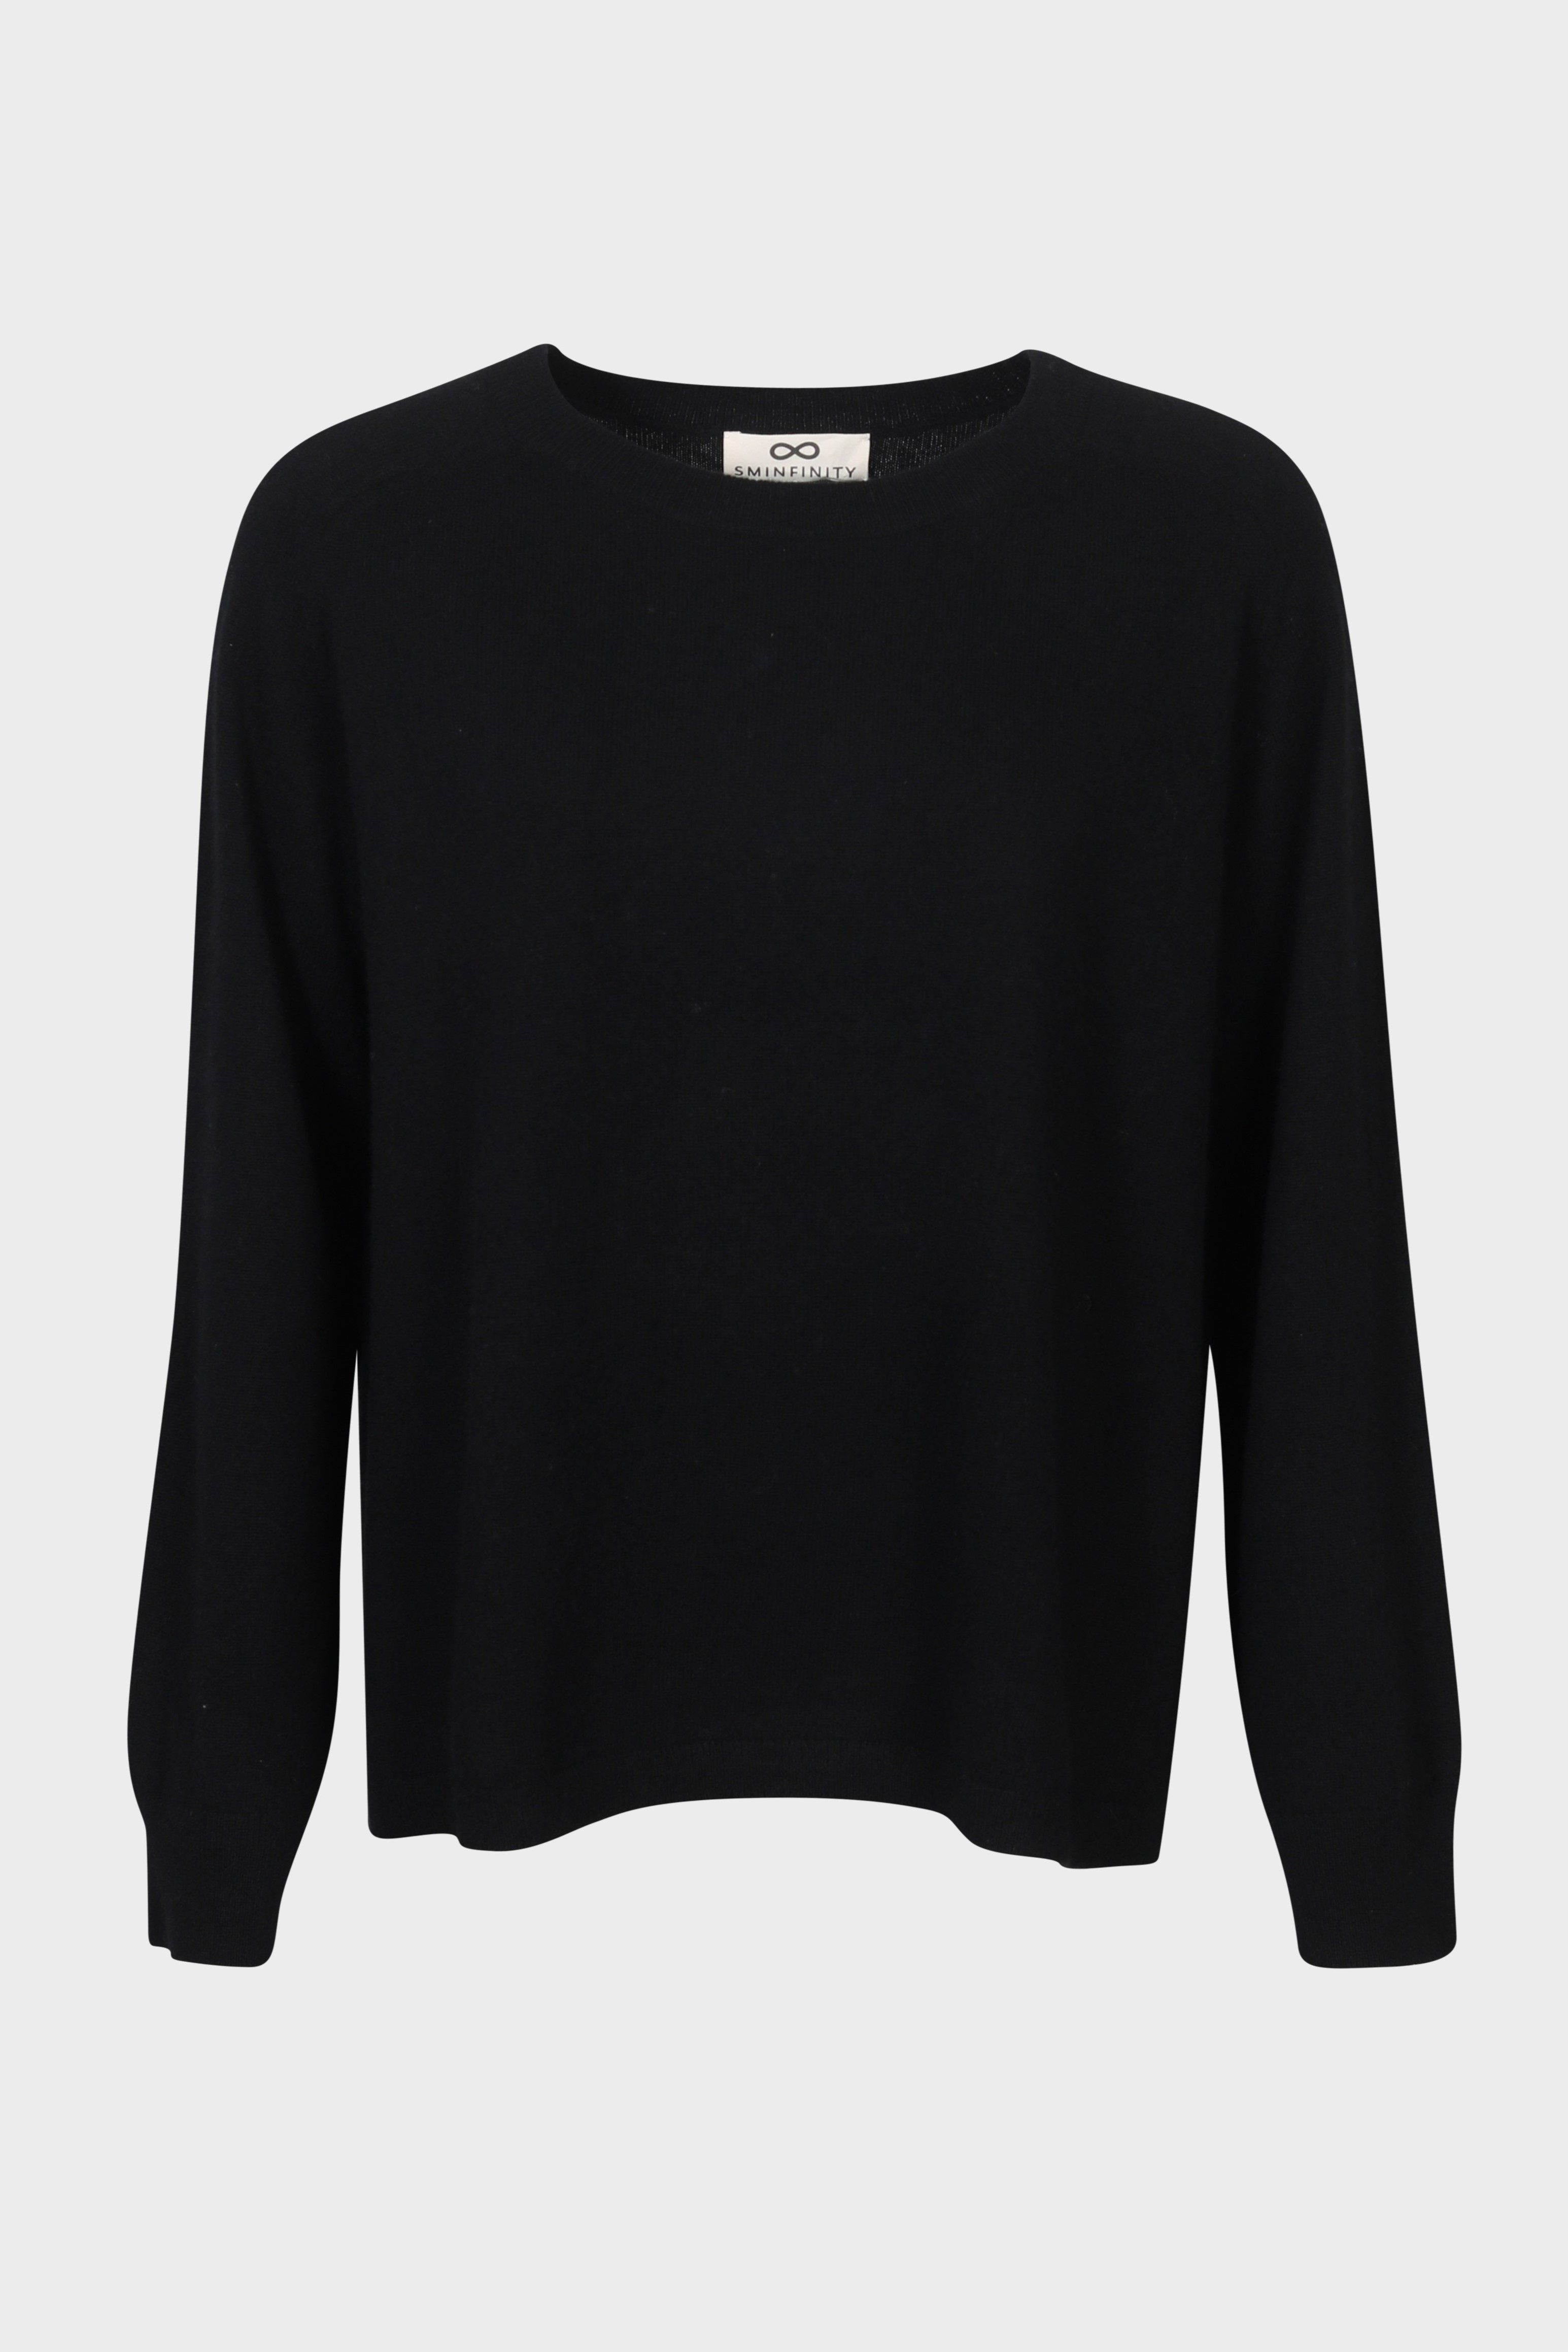 SMINFINITY Chilly Knit Pullover in Black XS/S